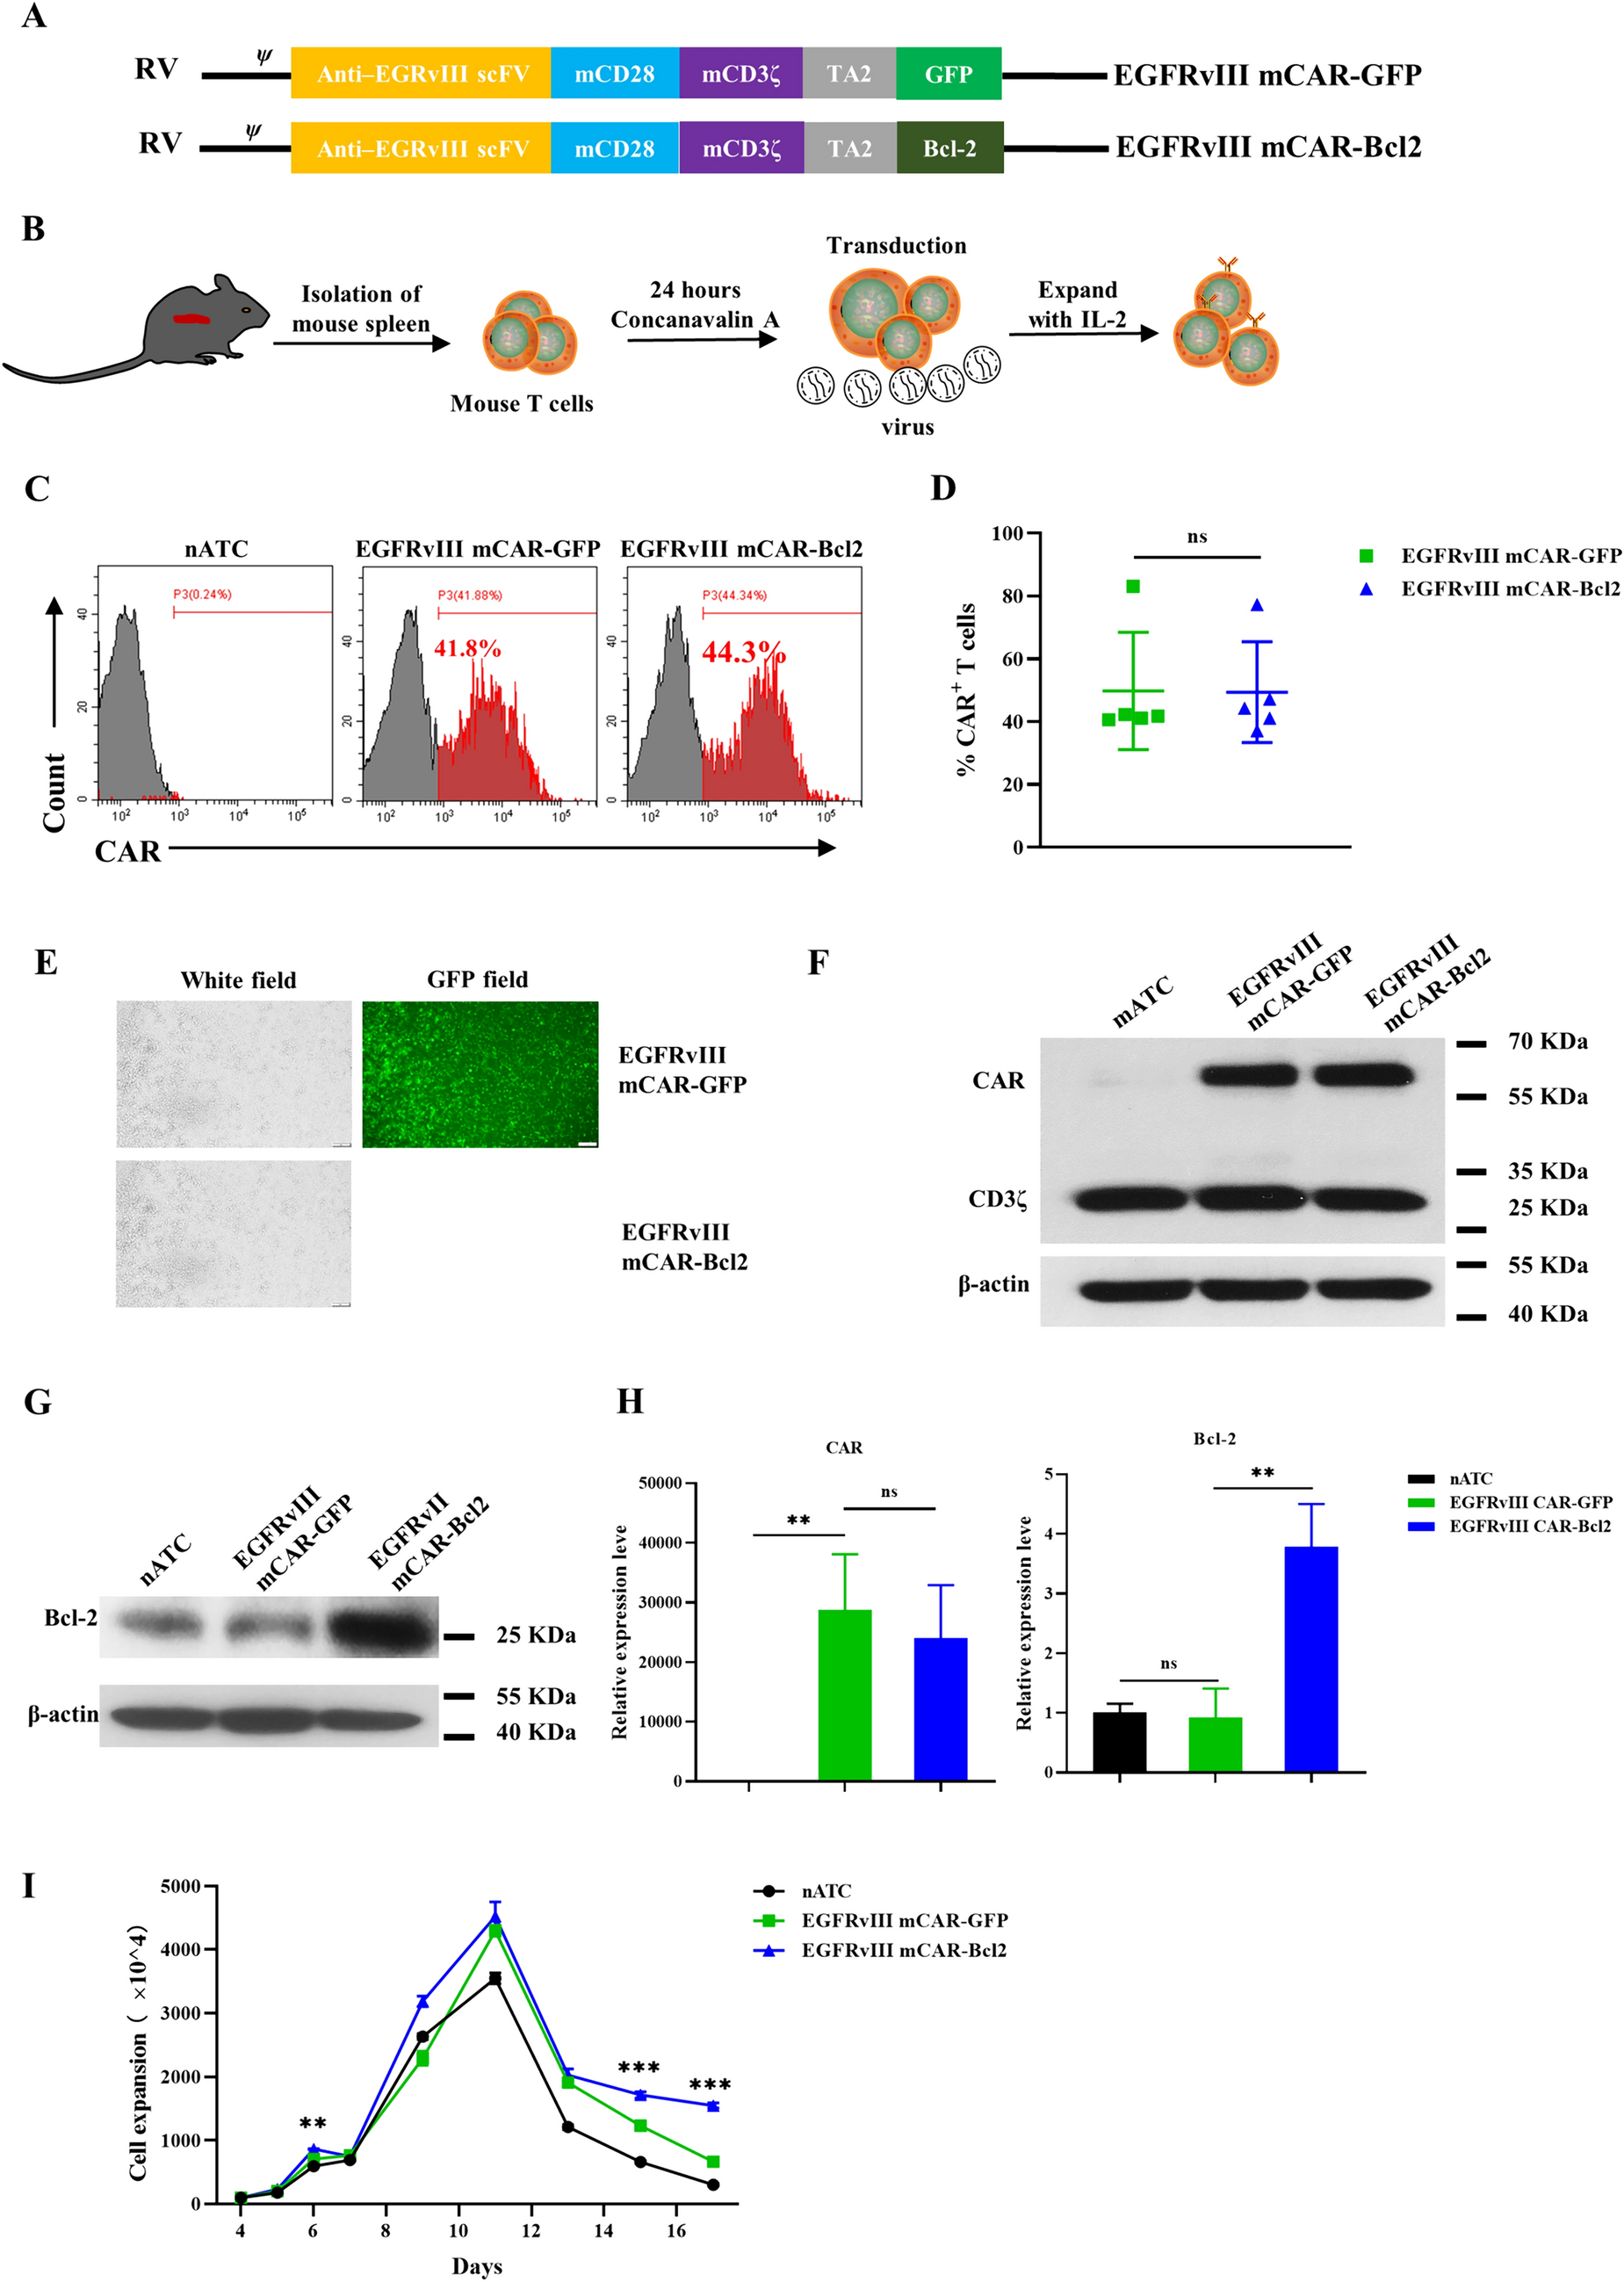 Overexpressing Bcl-2 enhances murine chimeric antigen receptor T cell therapy against solid tumor